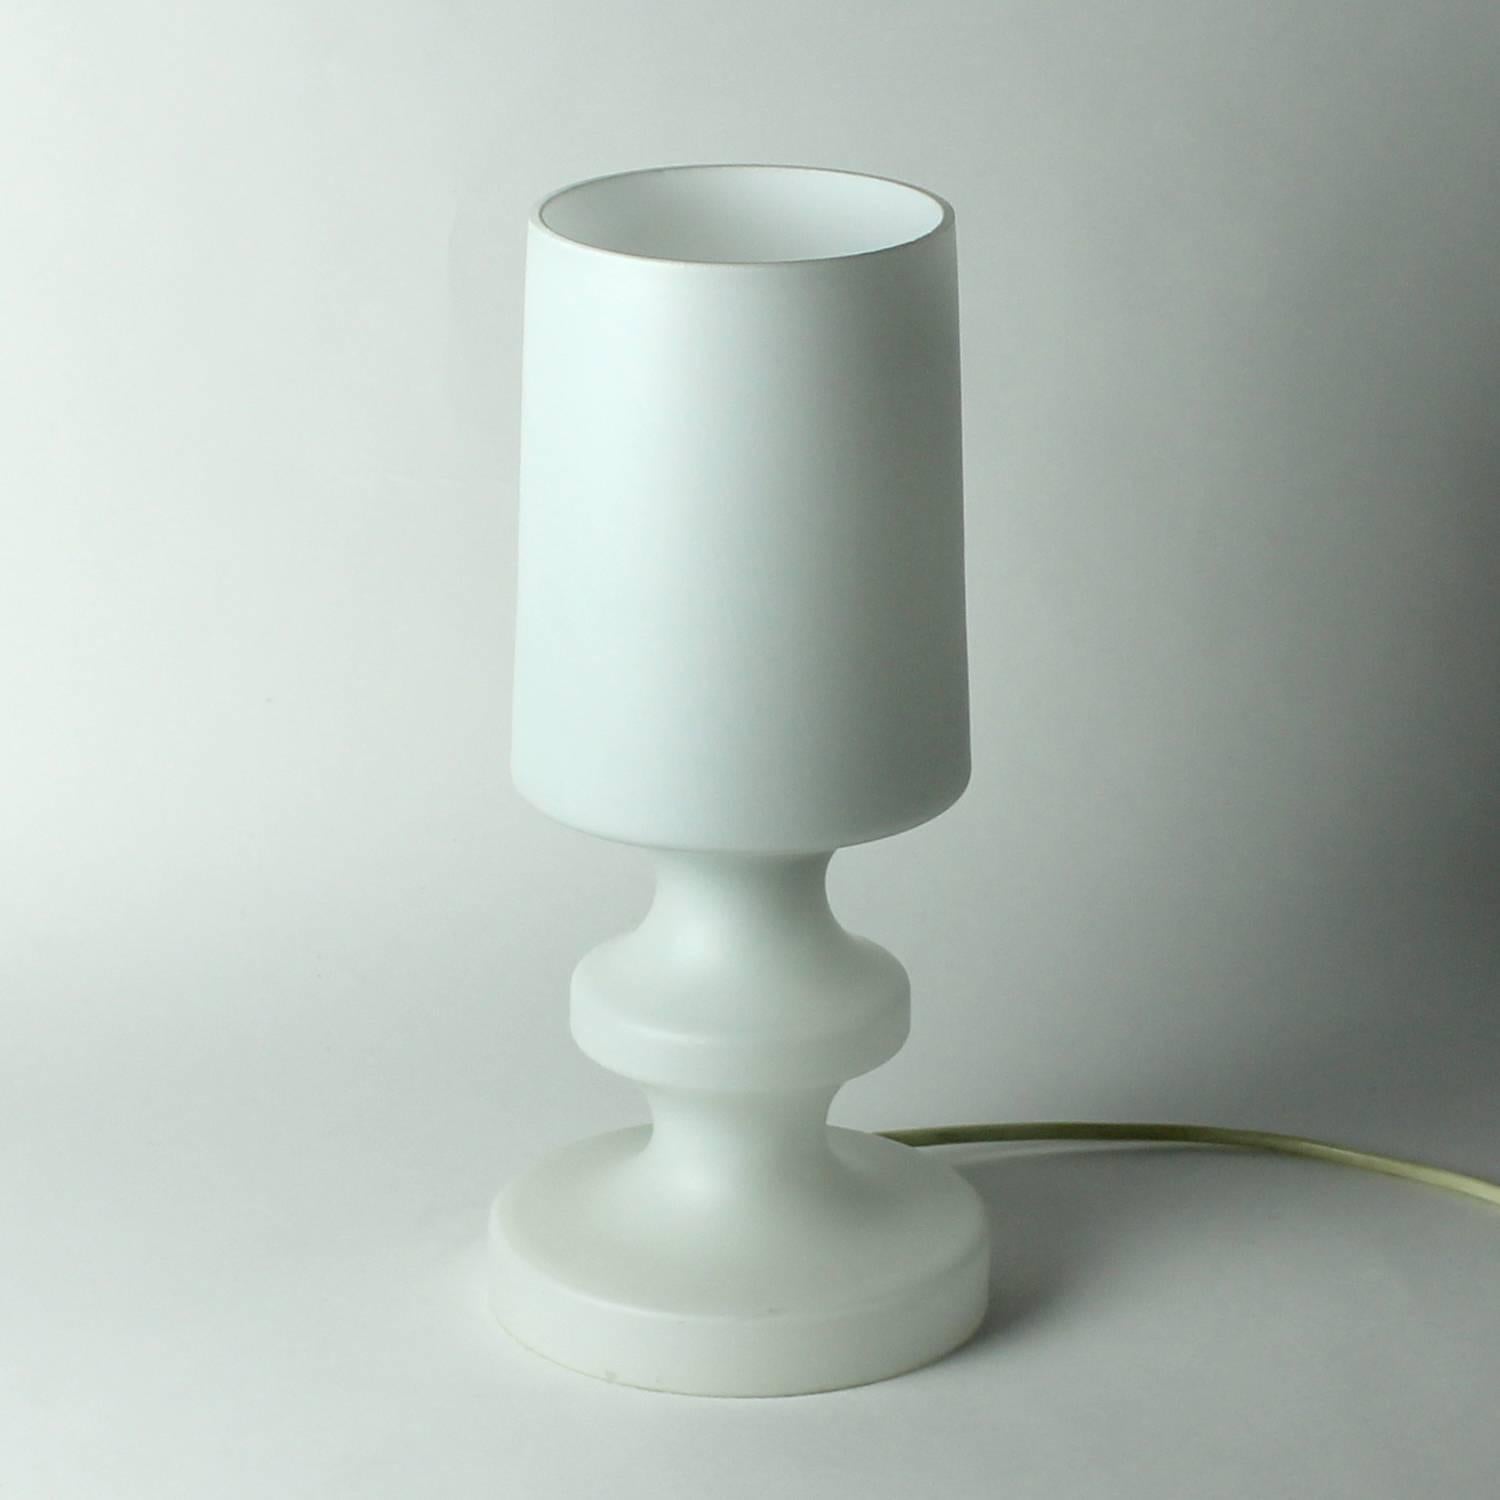 Beautiful and unique table lamp made of matte, pure white triplex opal glass. Designed by Ivan Jakes for Osvetlovaci Sklo company in Czechoslovakia in 1970s. This unique model is not only a very beautiful lamp with lovely and soft light, but also a